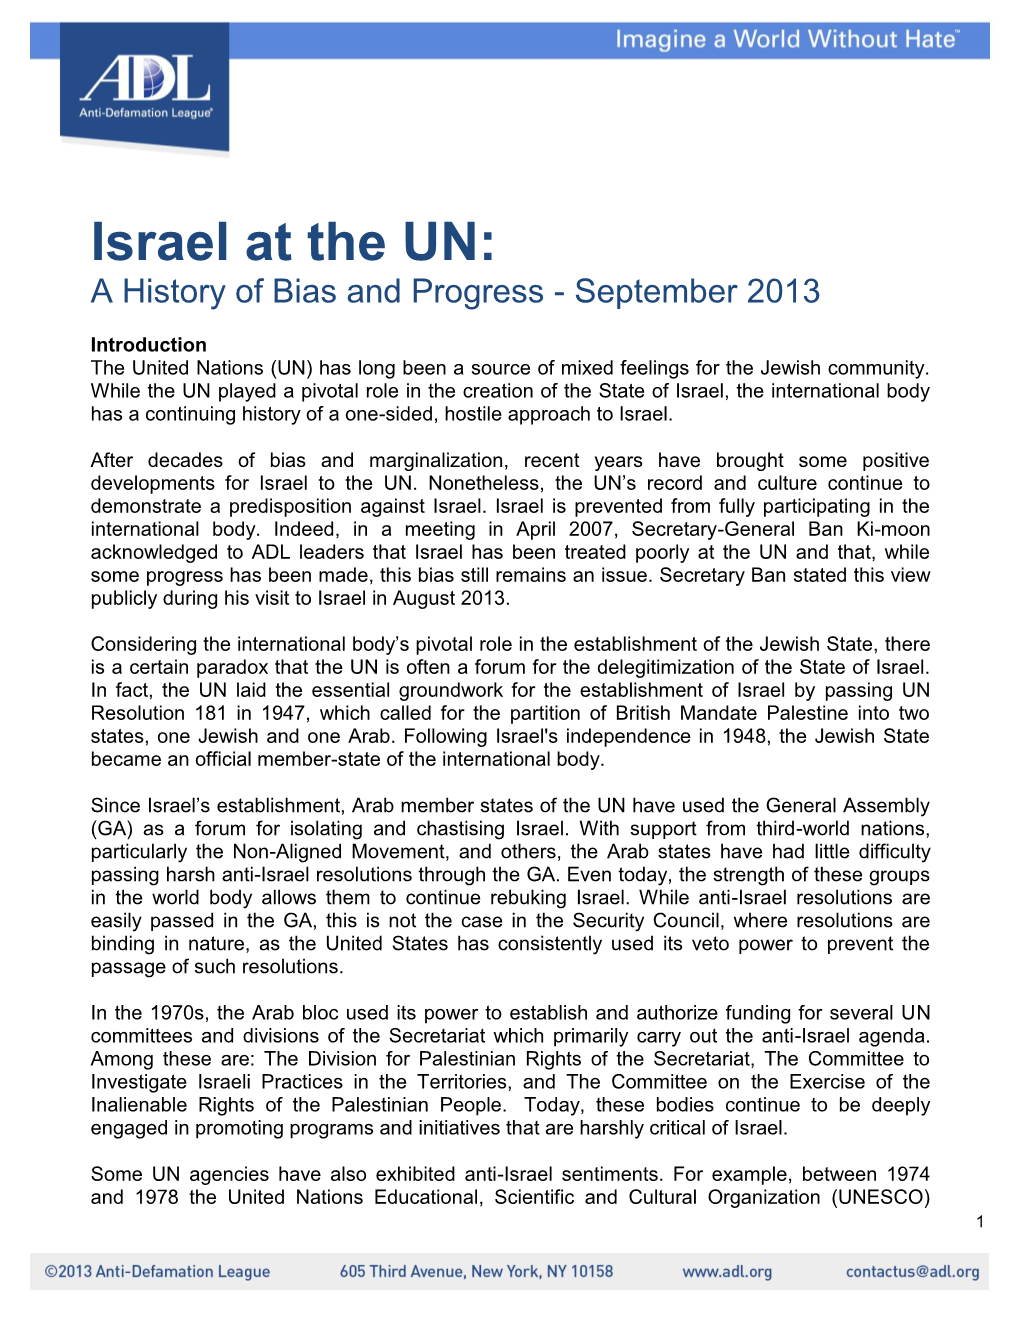 Israel at the UN: a History of Bias and Progress - September 2013